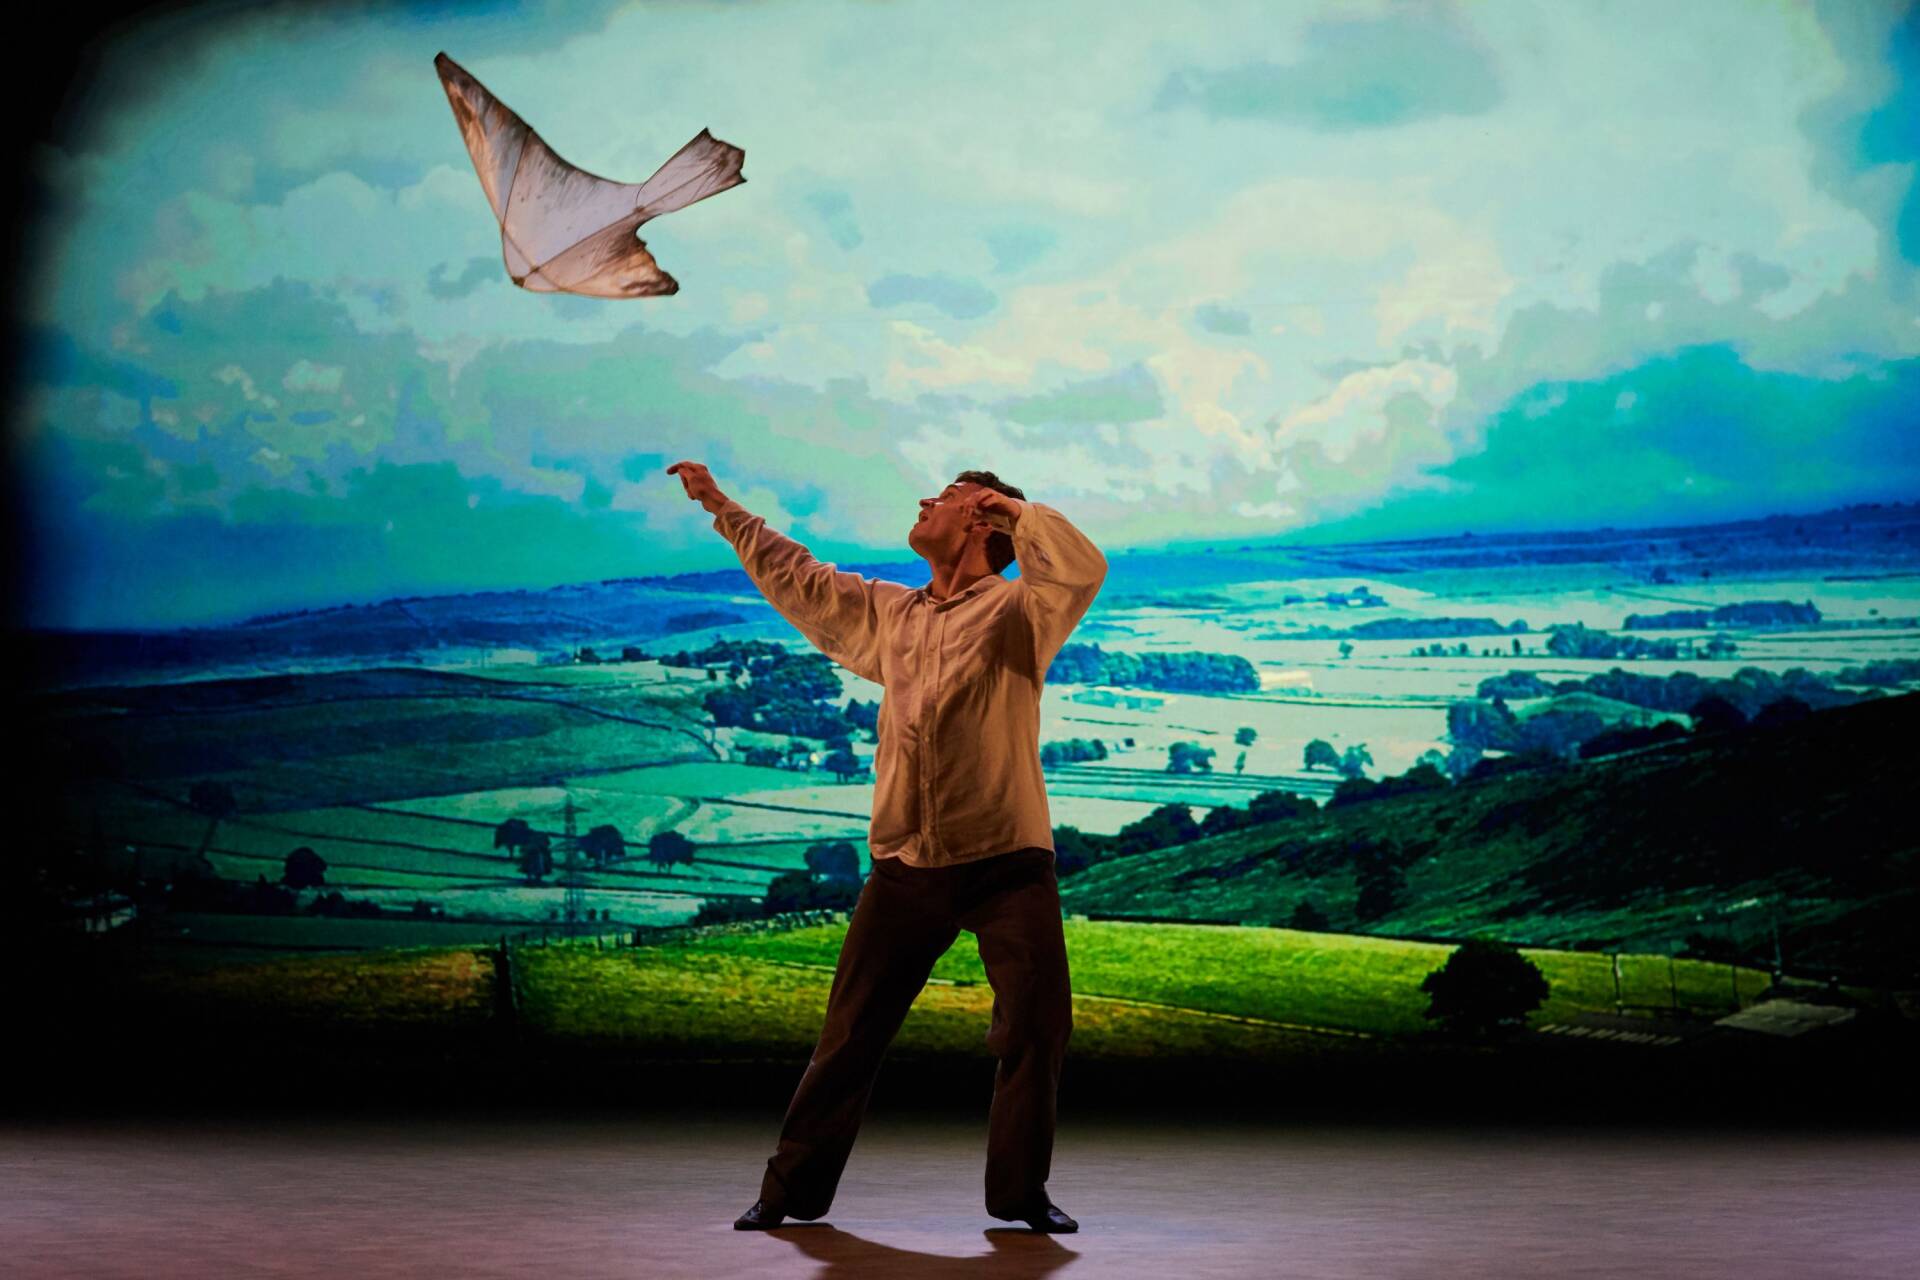 A man on a stage looks up at a kestrel kite